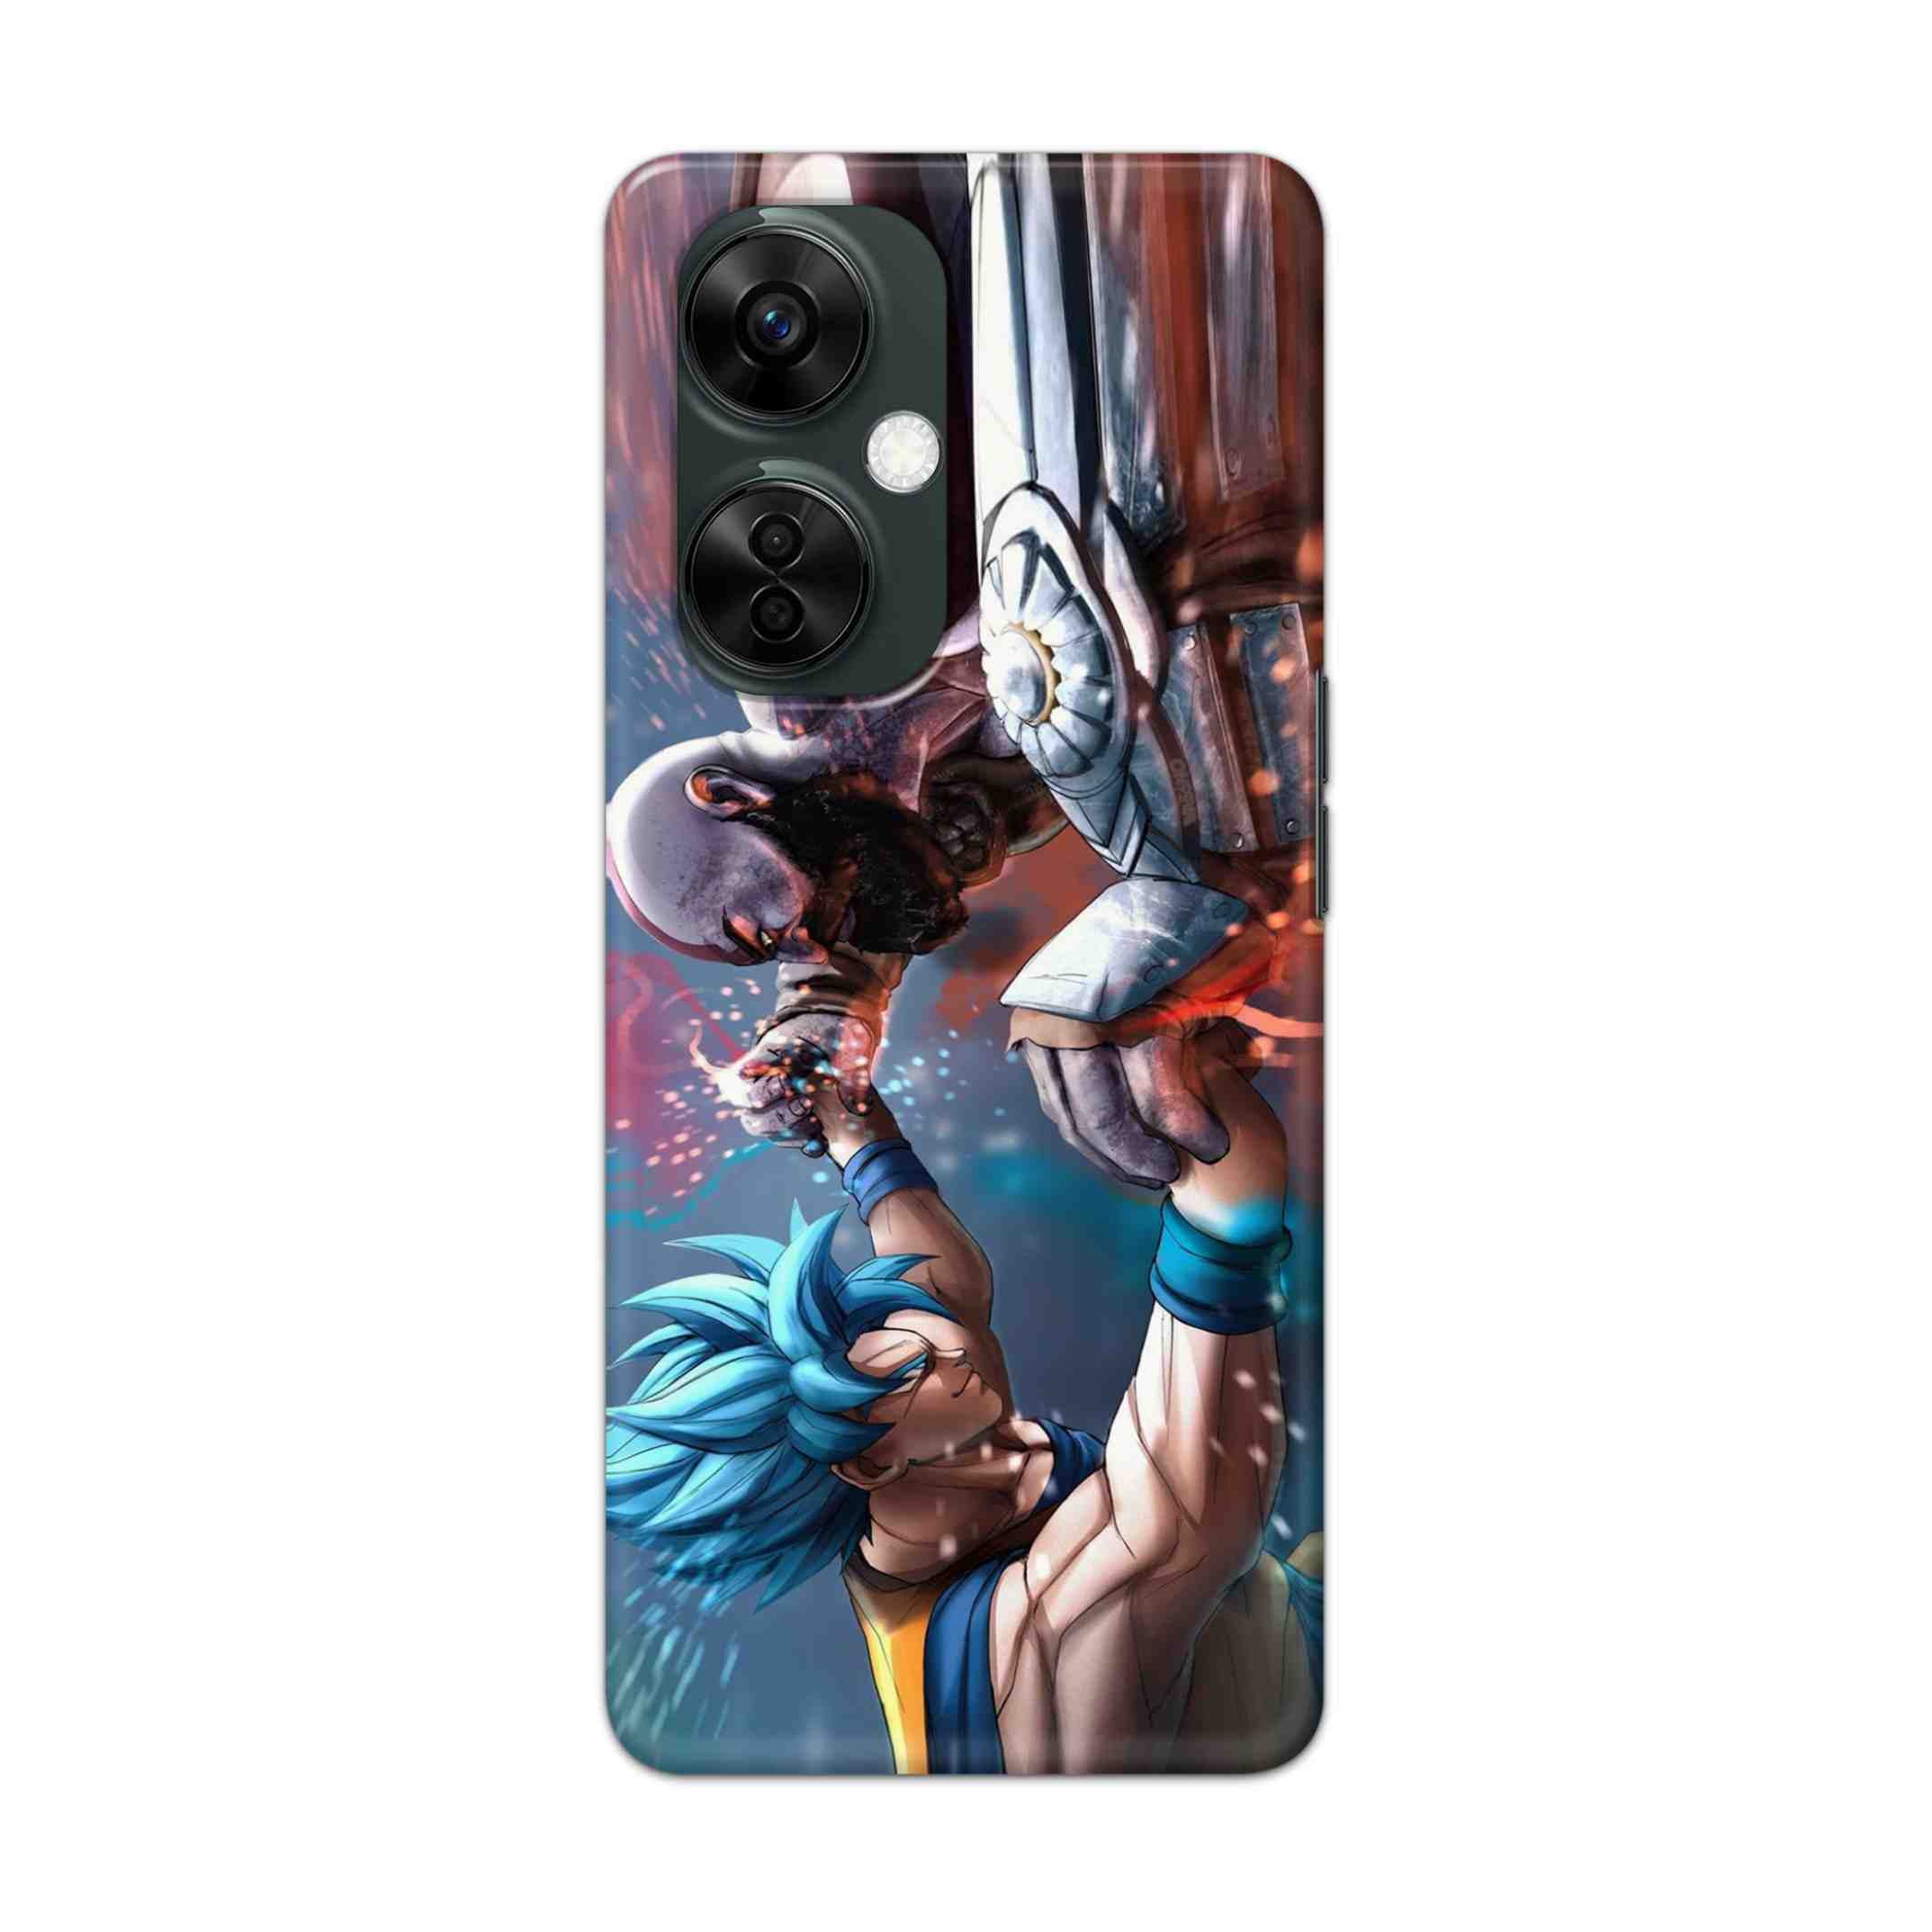 Buy Goku Vs Kratos Hard Back Mobile Phone Case Cover For Oneplus Nord CE 3 Lite Online